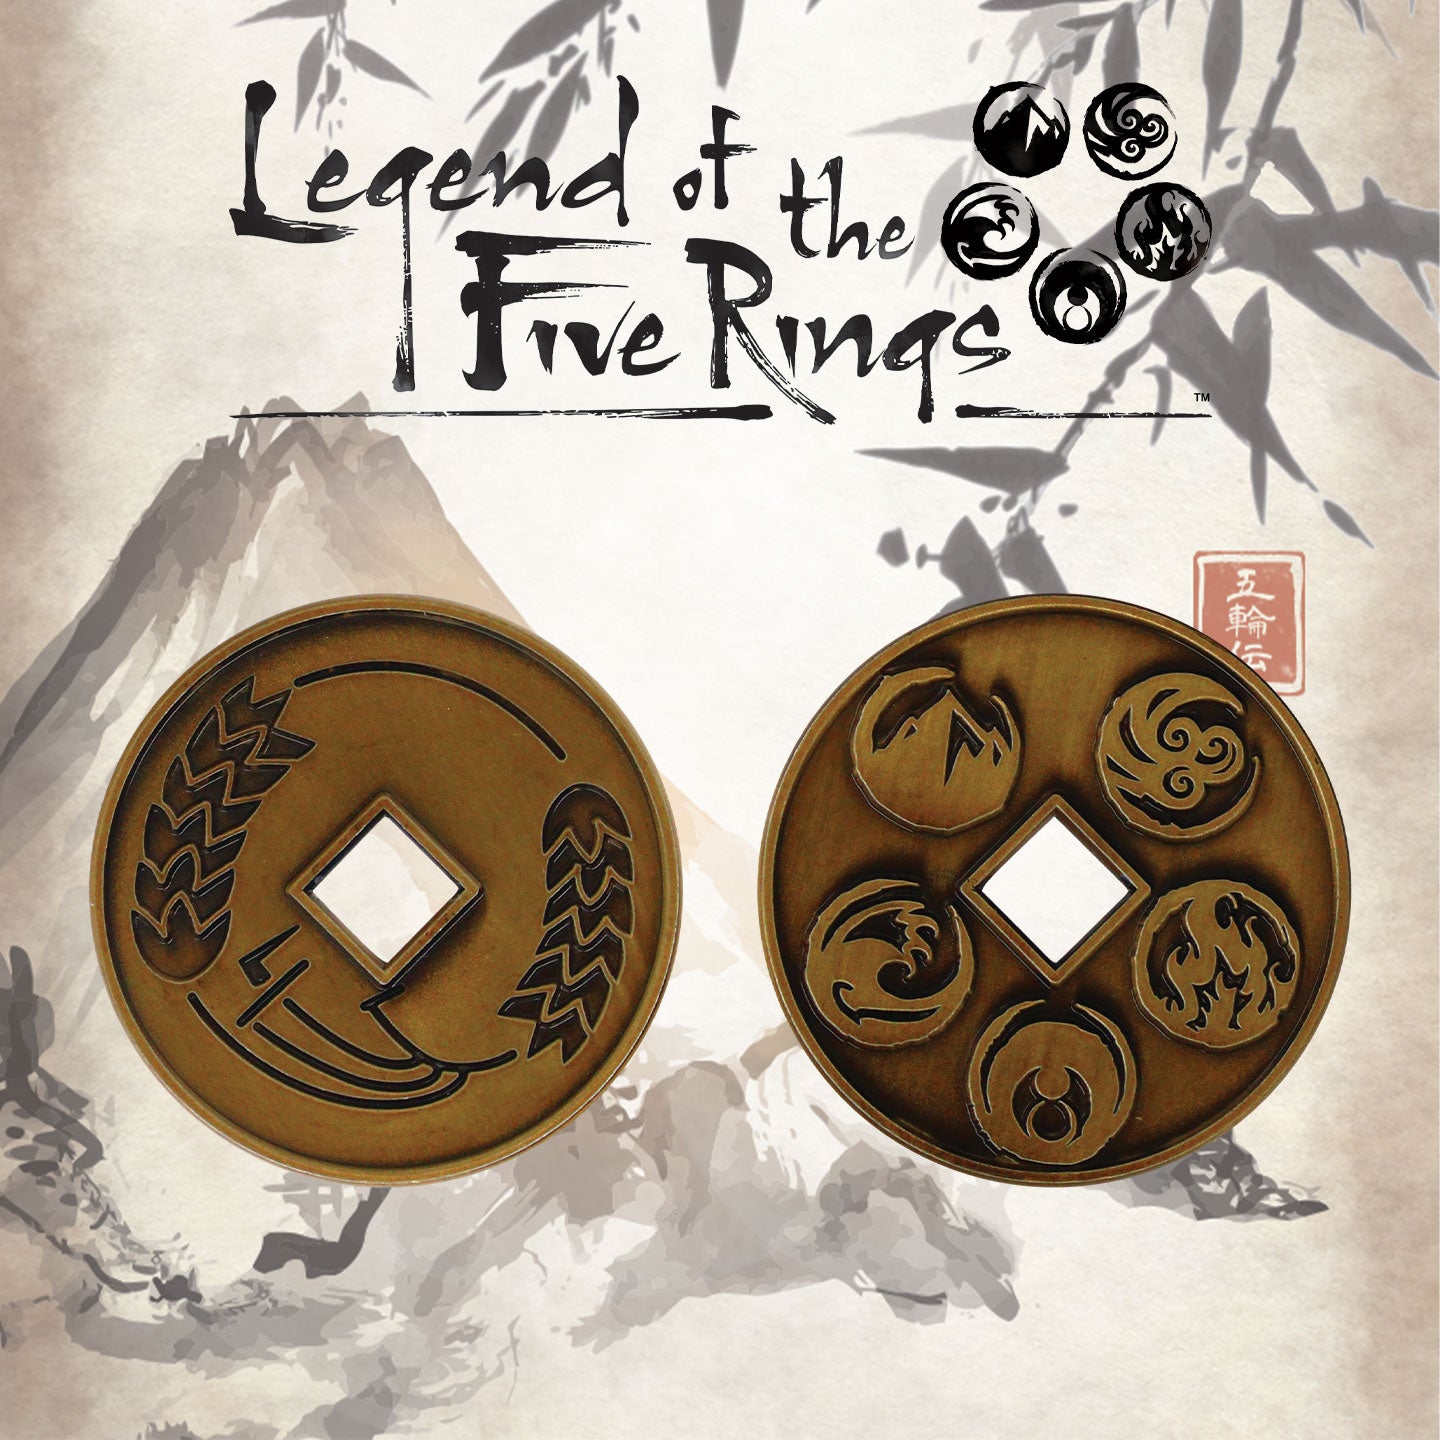 Legend of the Five Rings Limited Edition Collectible Koku Coin